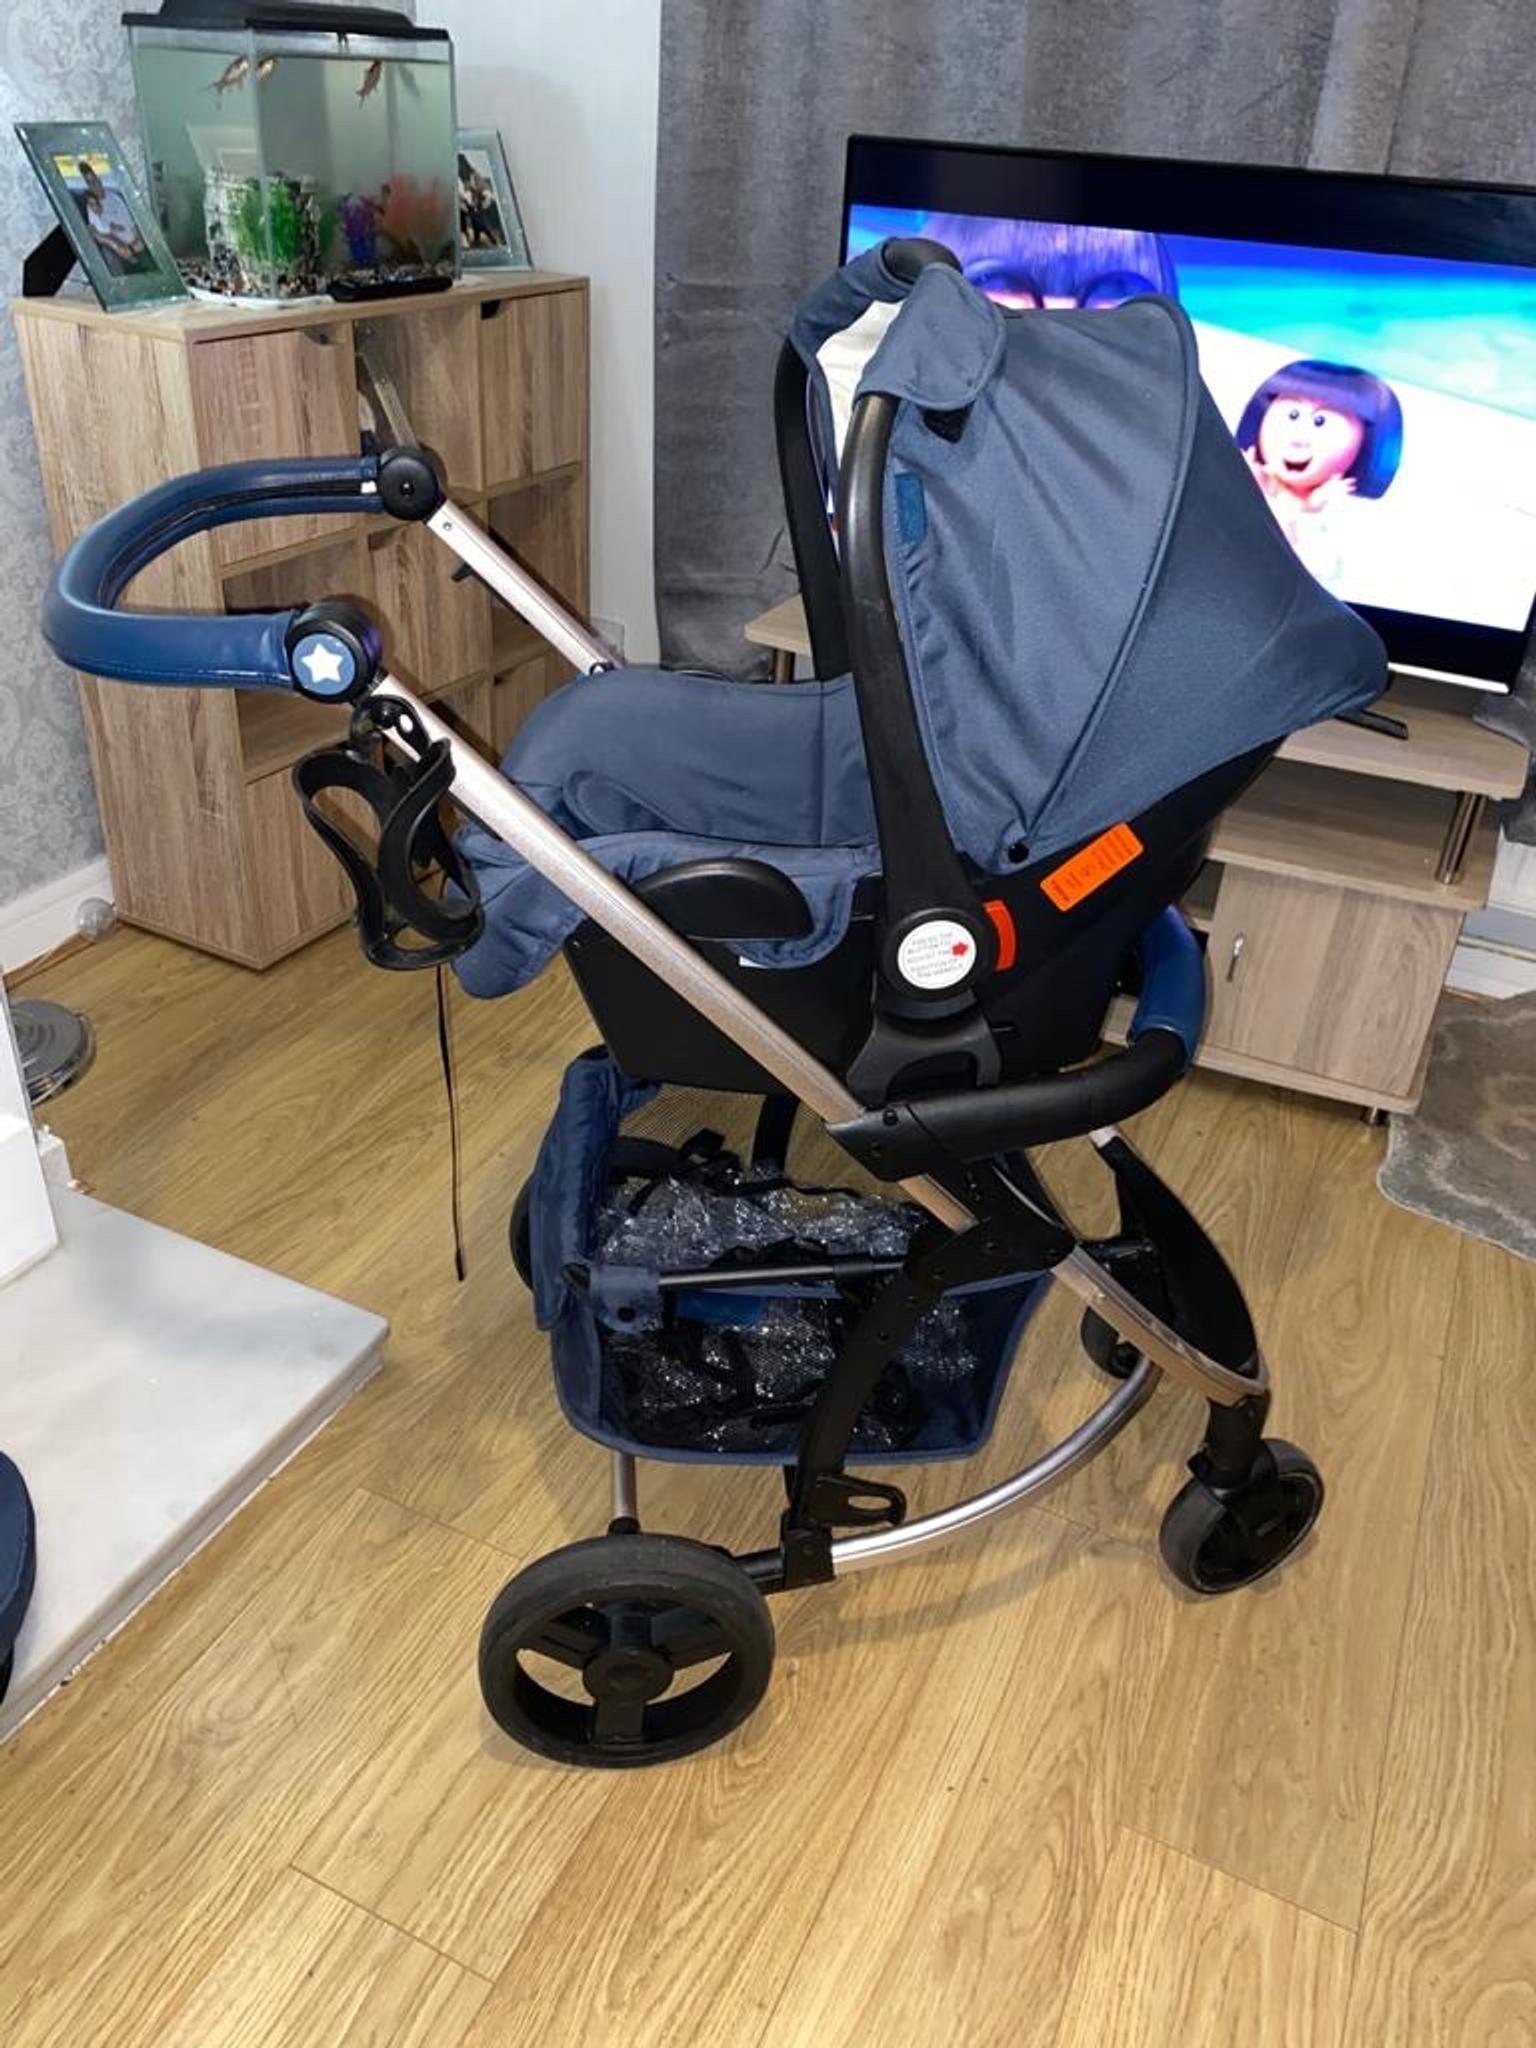 my babiie billie faiers mb200  travel system